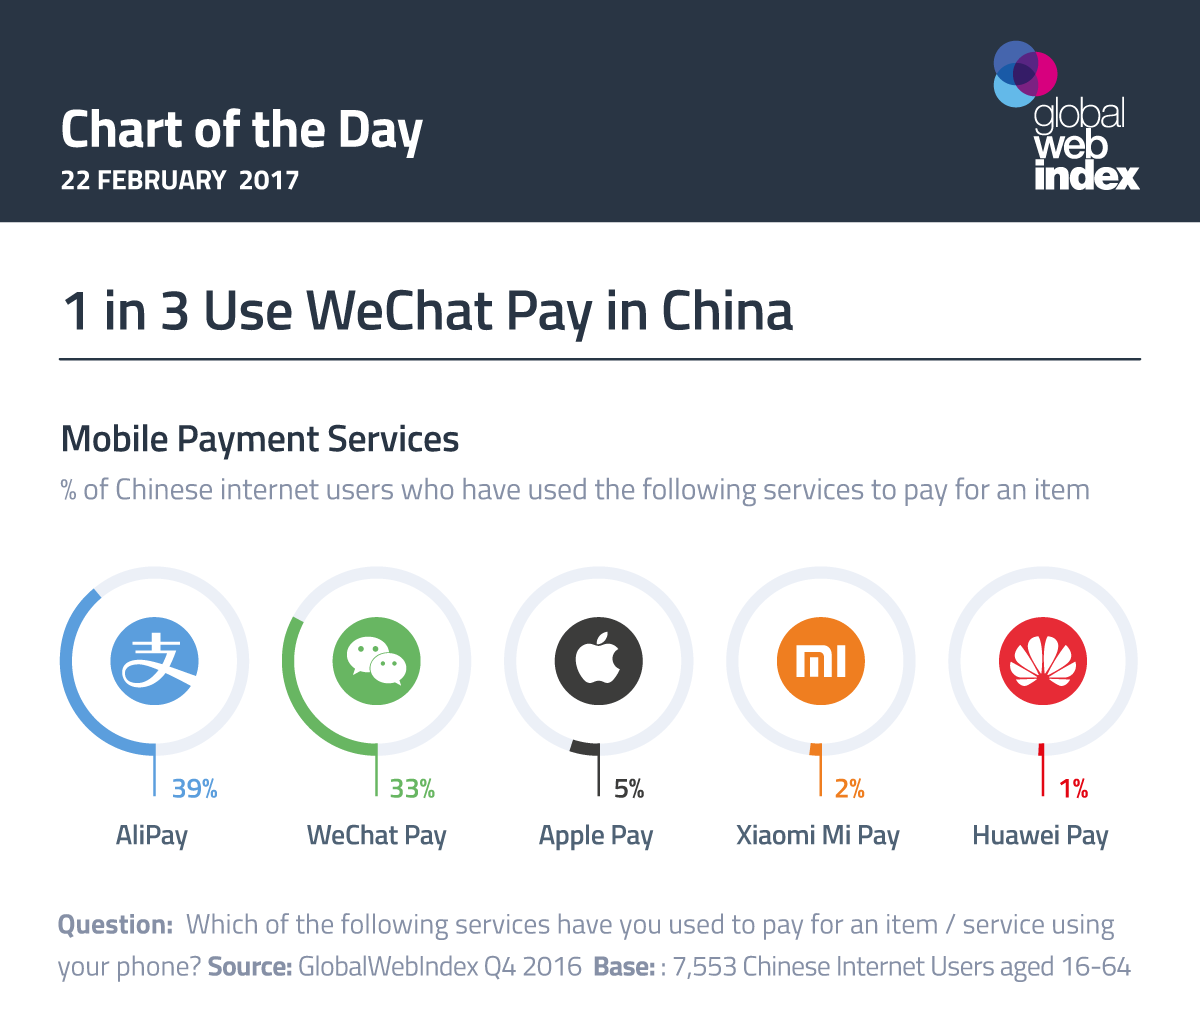 How to get users hooked on mobile payment products, by Wen Wang